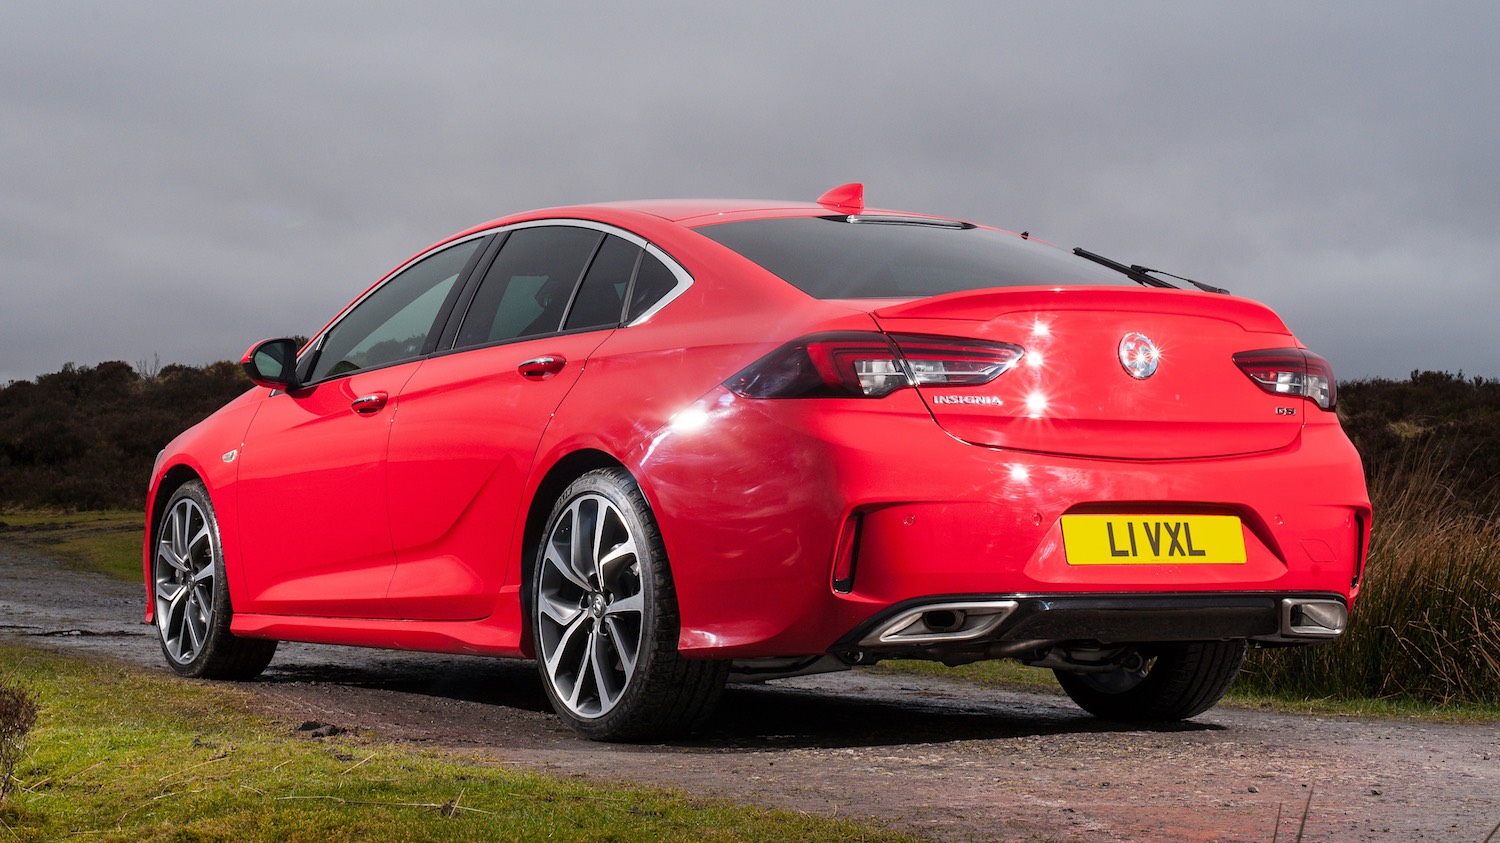 Tom Scanlan reviews the Vauxhall Insignia GSi Sportshatch for Drive 19